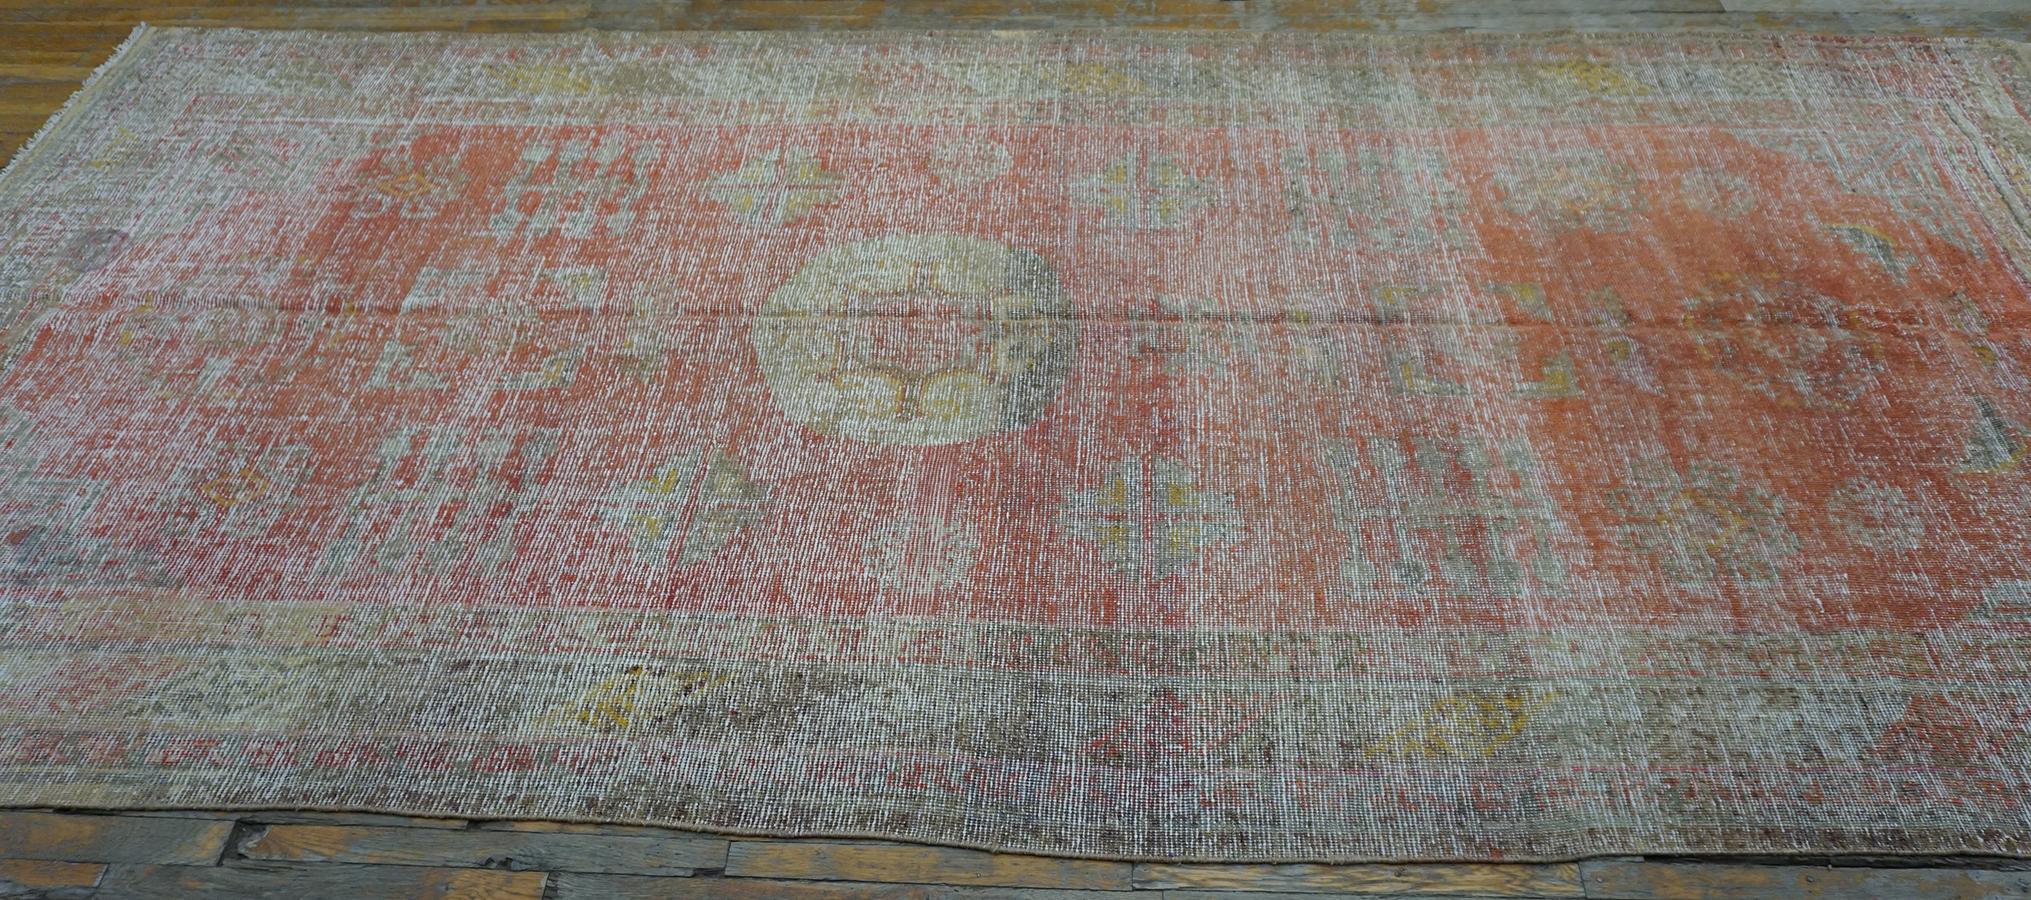 Early 20th Century Chinese Khotan Carpet For Sale 5